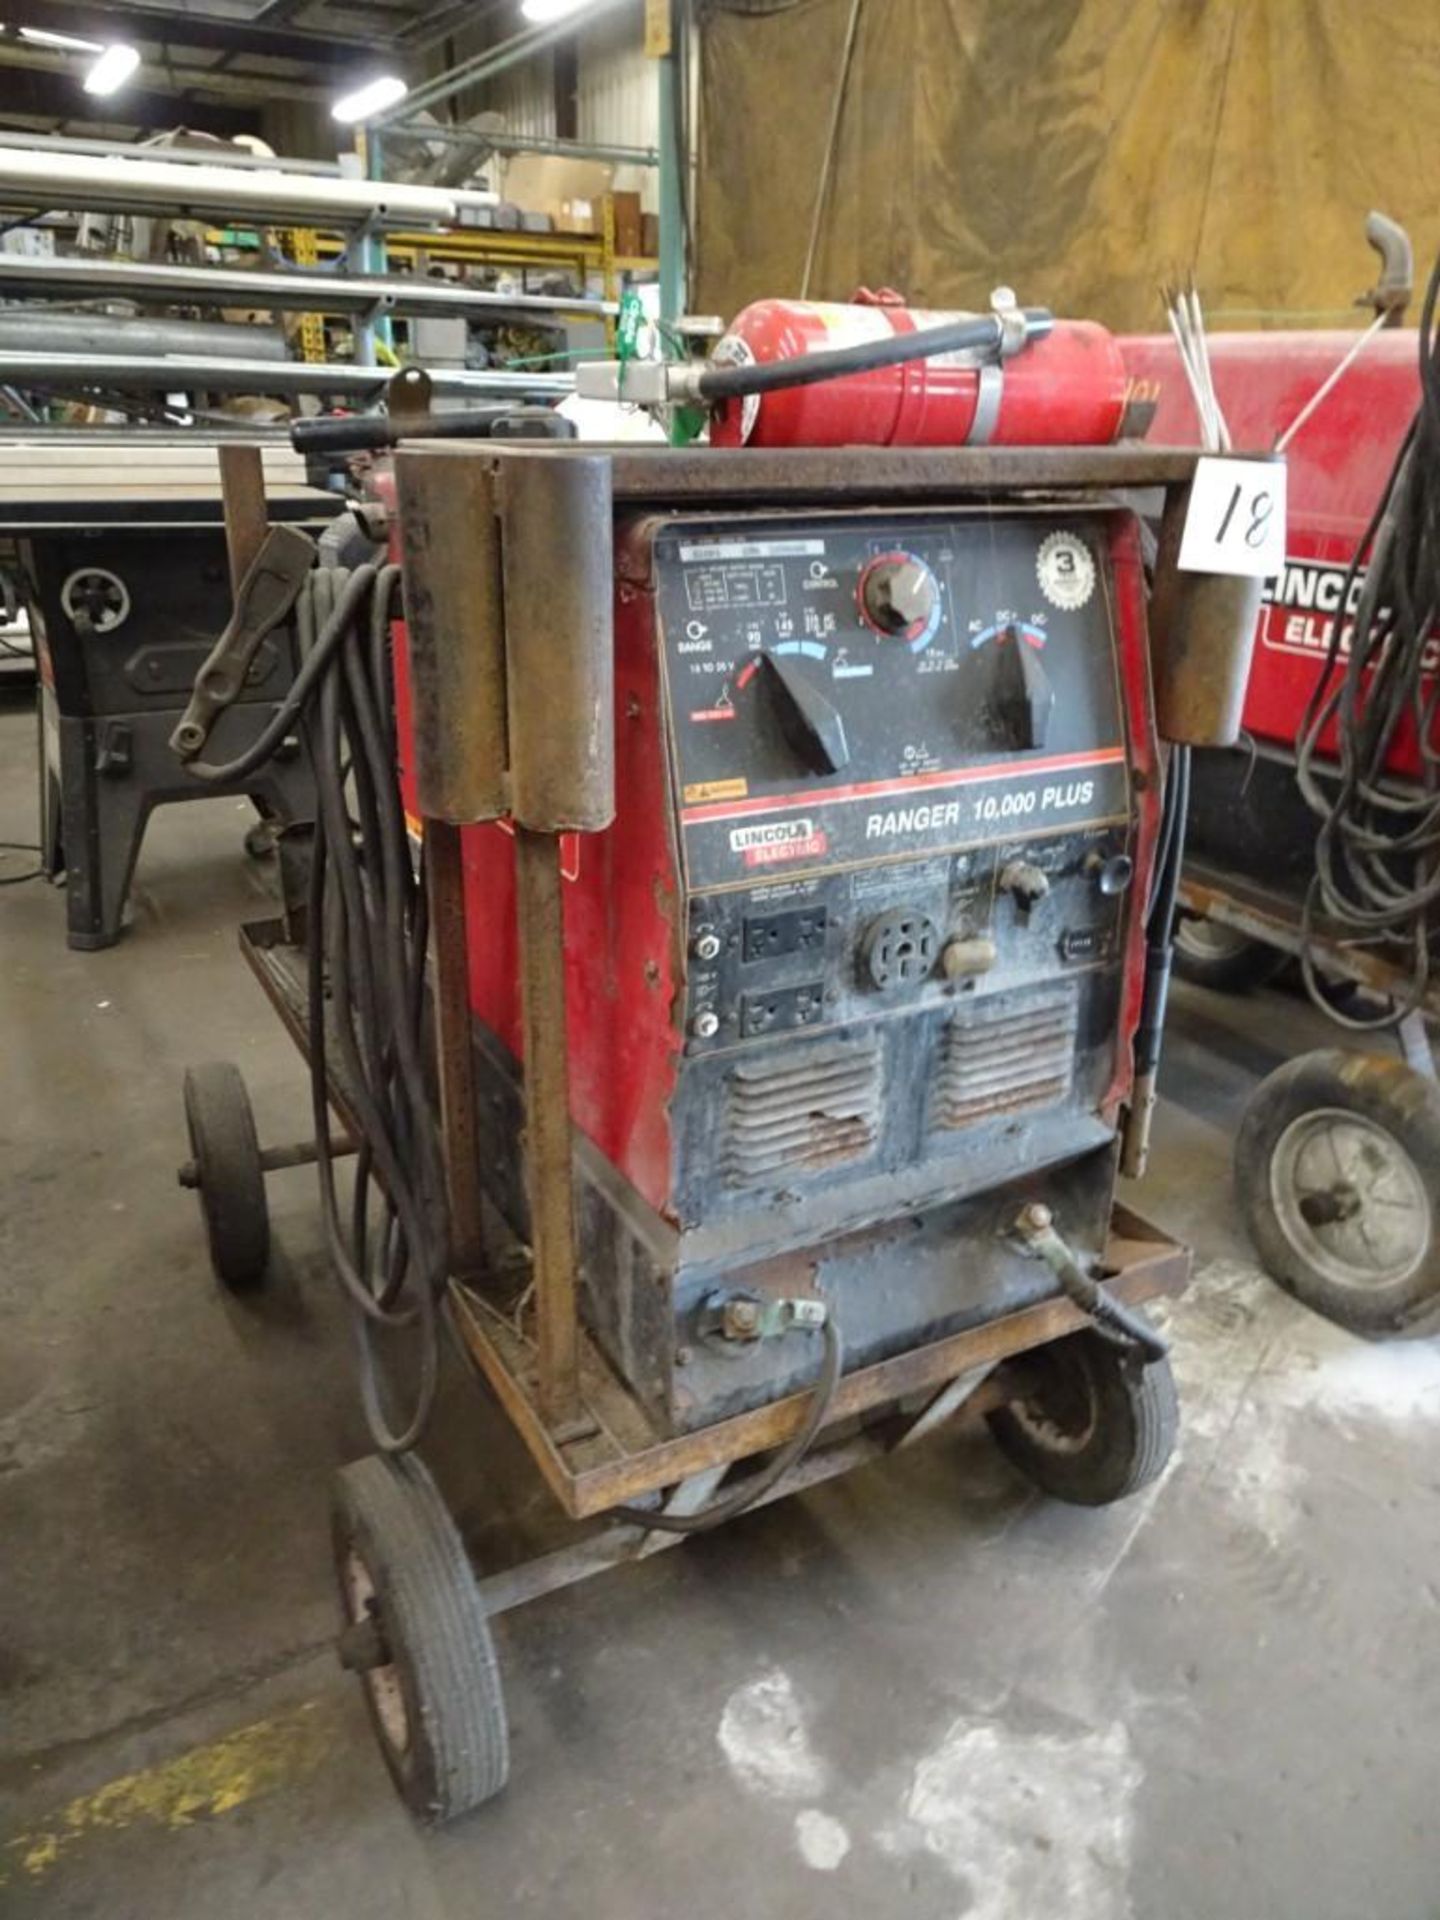 Lincoln Electric RANGER 10,000 PLUS Engine Driven Welder - Image 2 of 5